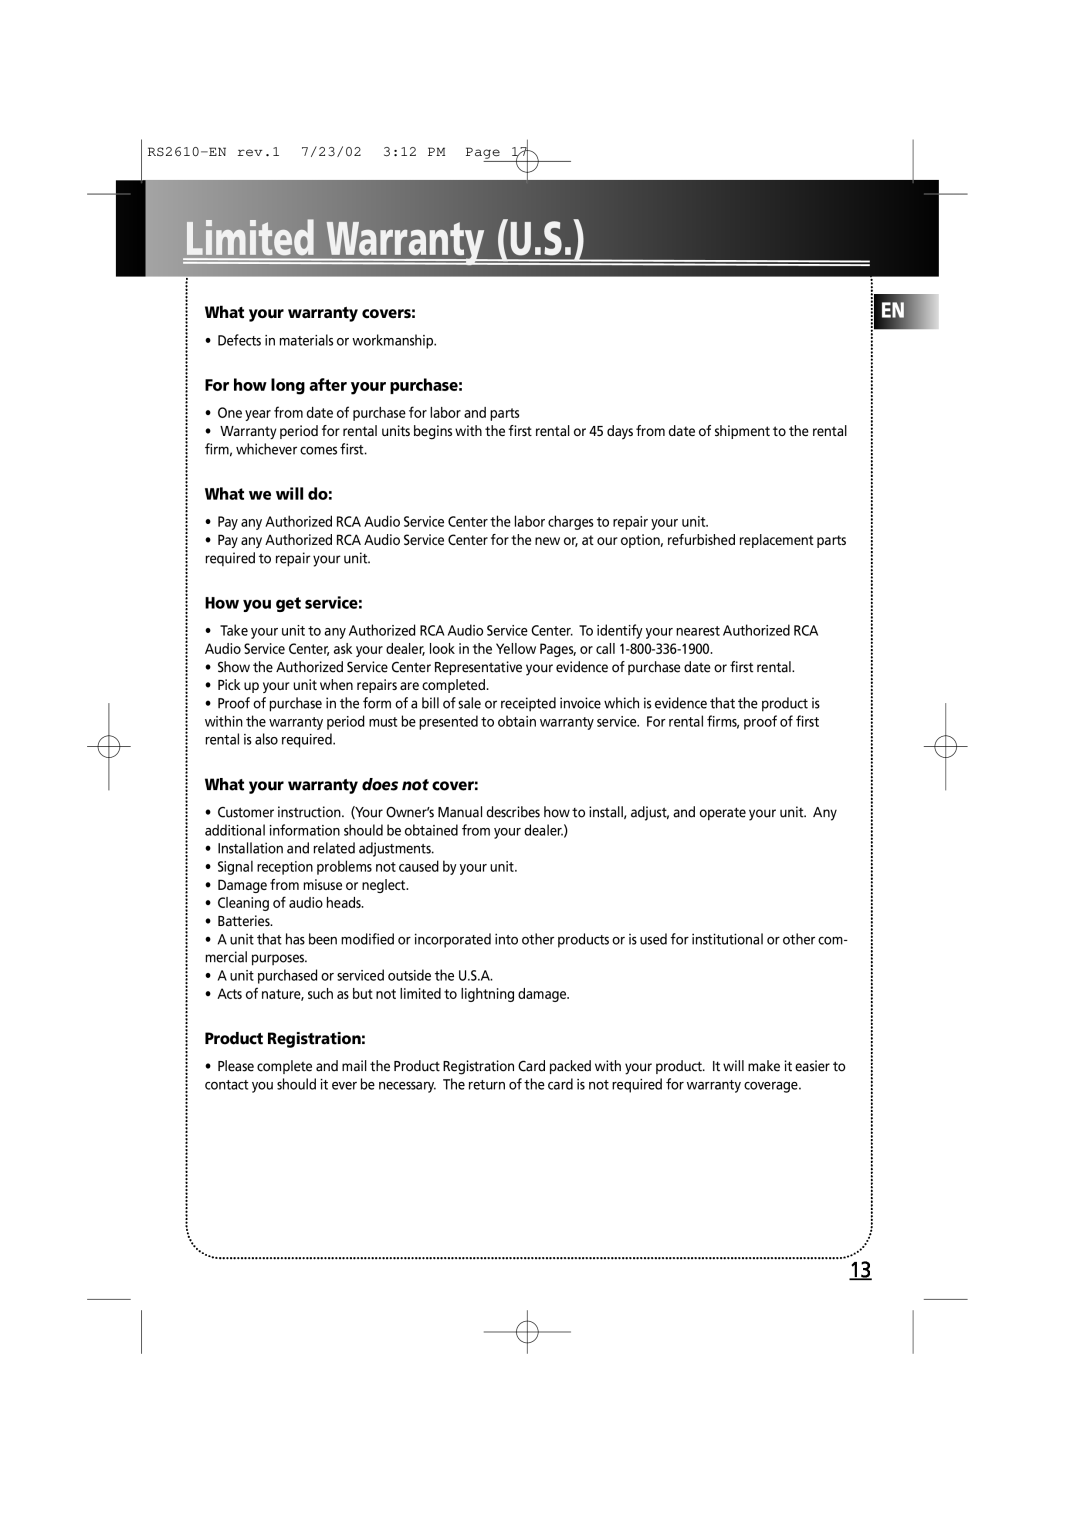 RCA RS2610 manual Limited Warranty U.S, What your warranty covers, For how long after your purchase, What we will do 